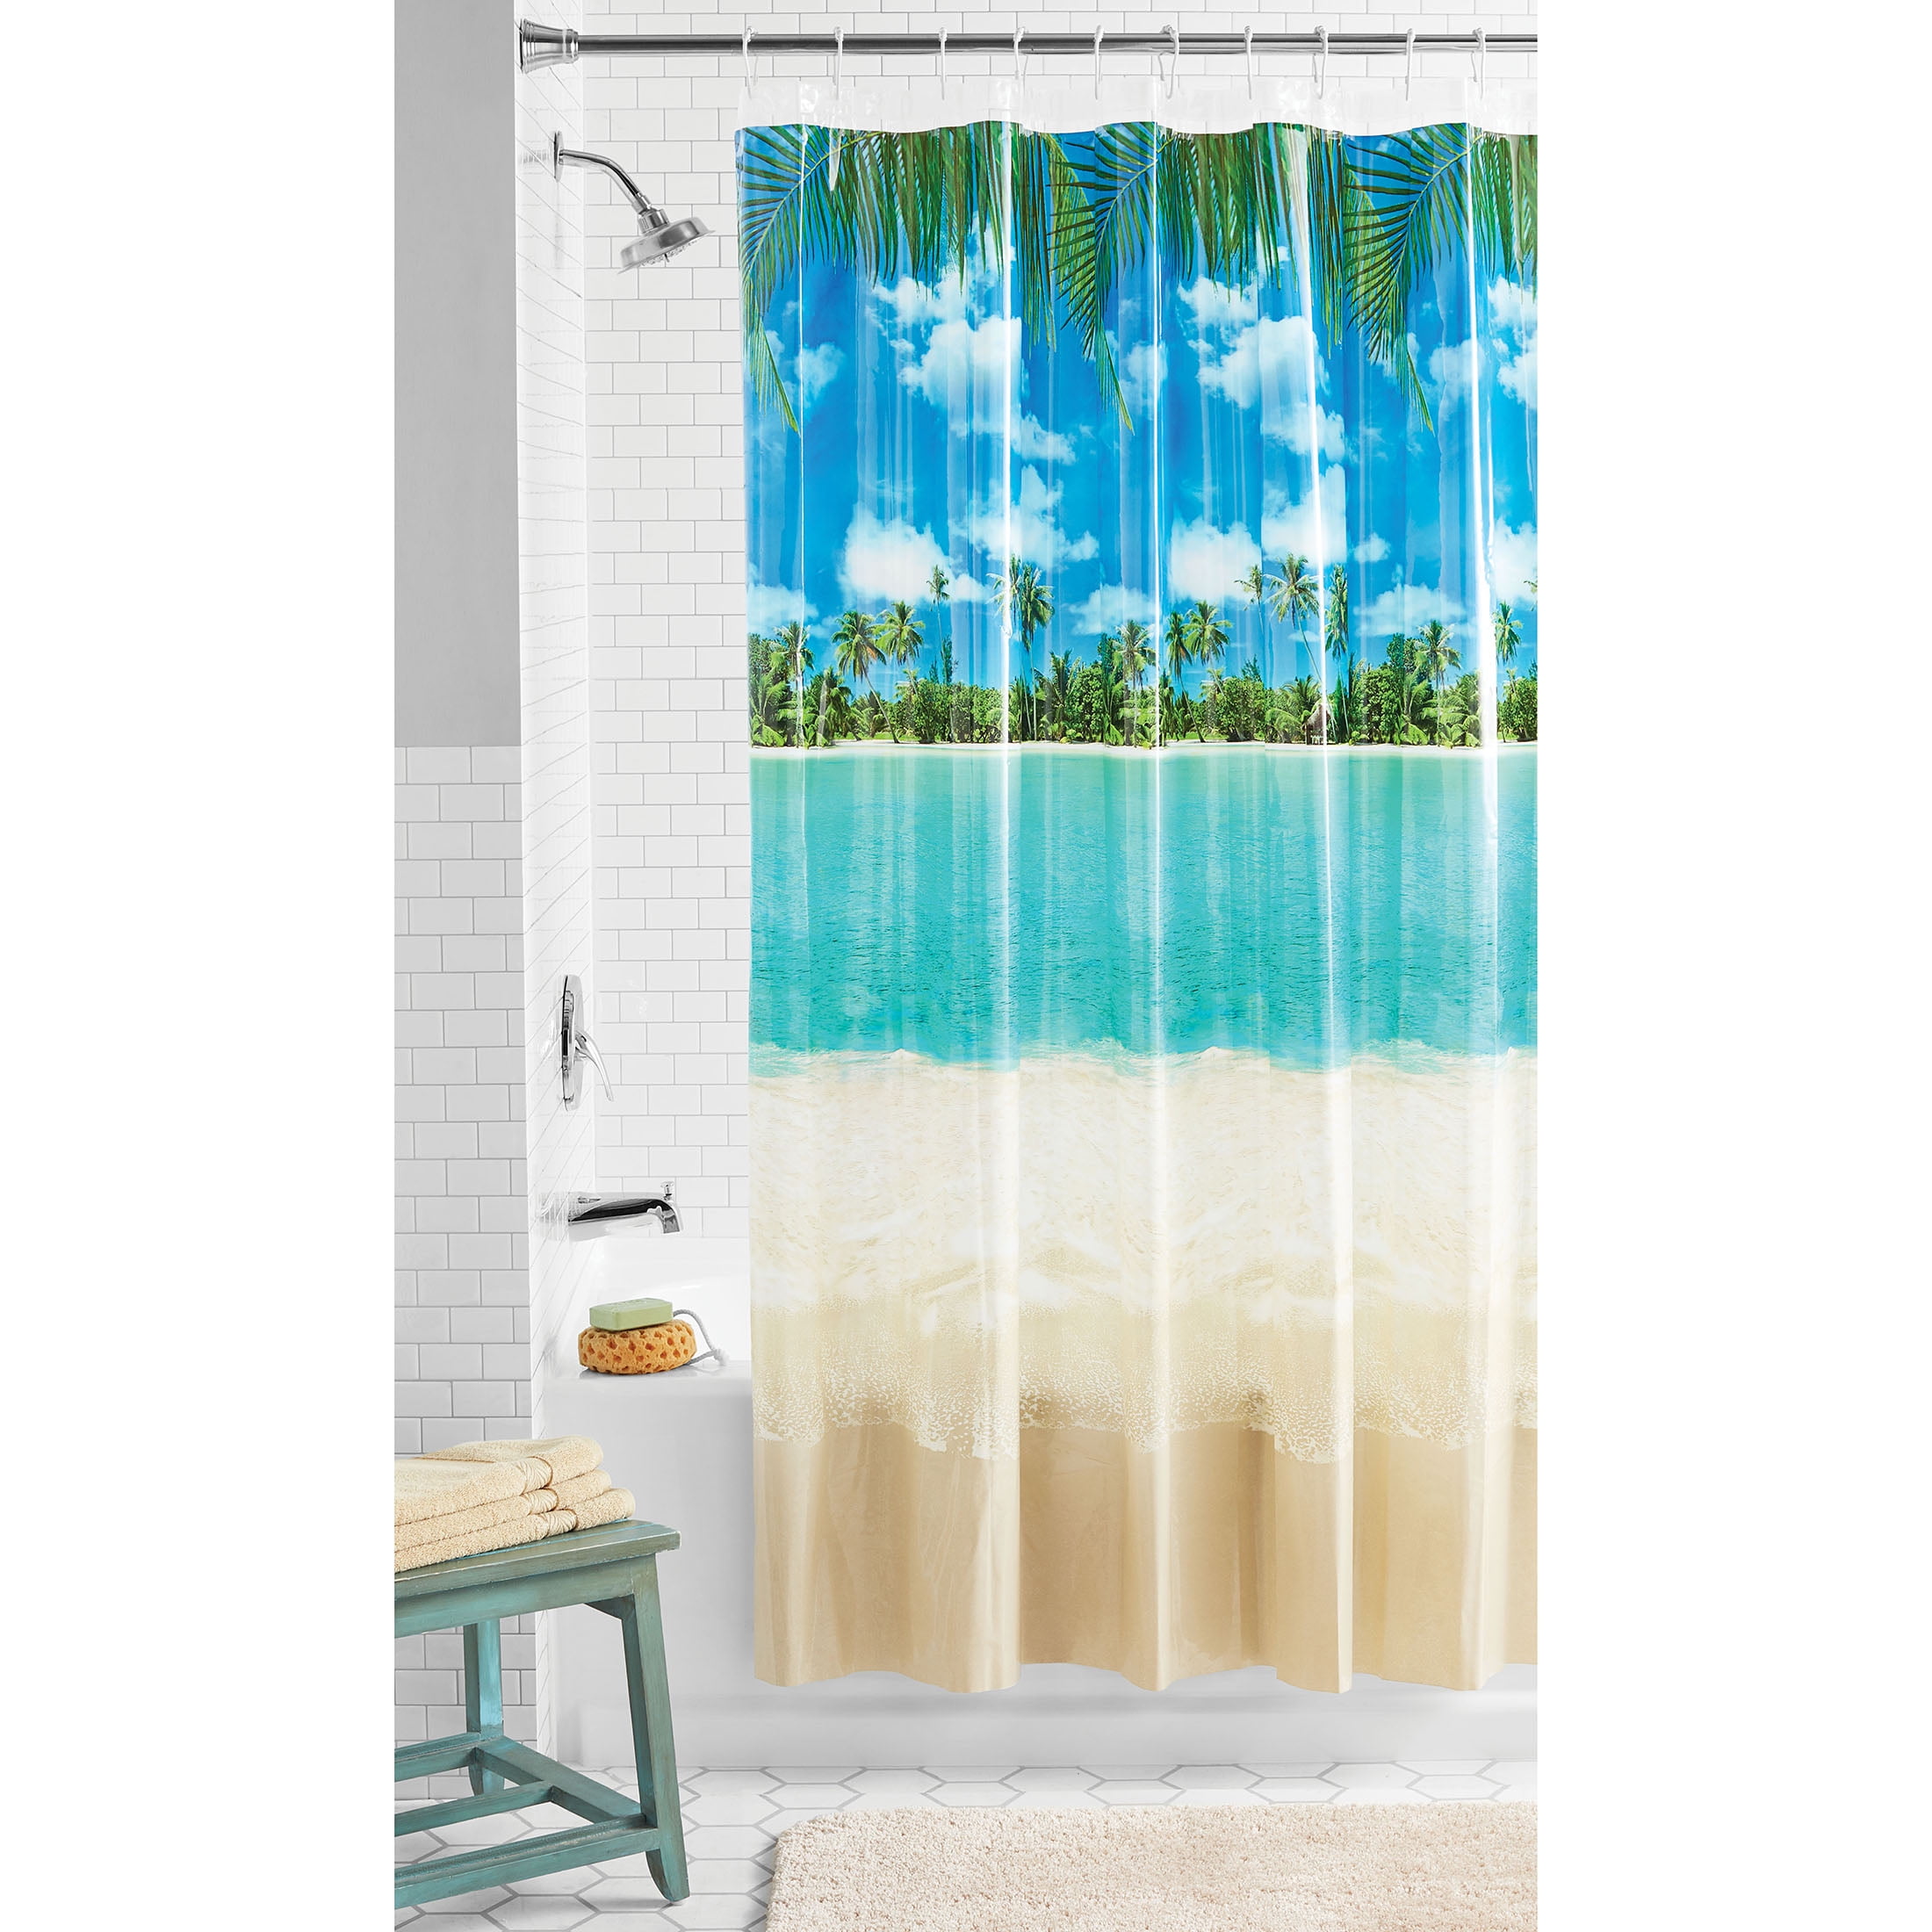 Details about   Mainstays Stained Glass Meadow PEVA Shower Curtain FREE SHIPPING MULTI COLOR 